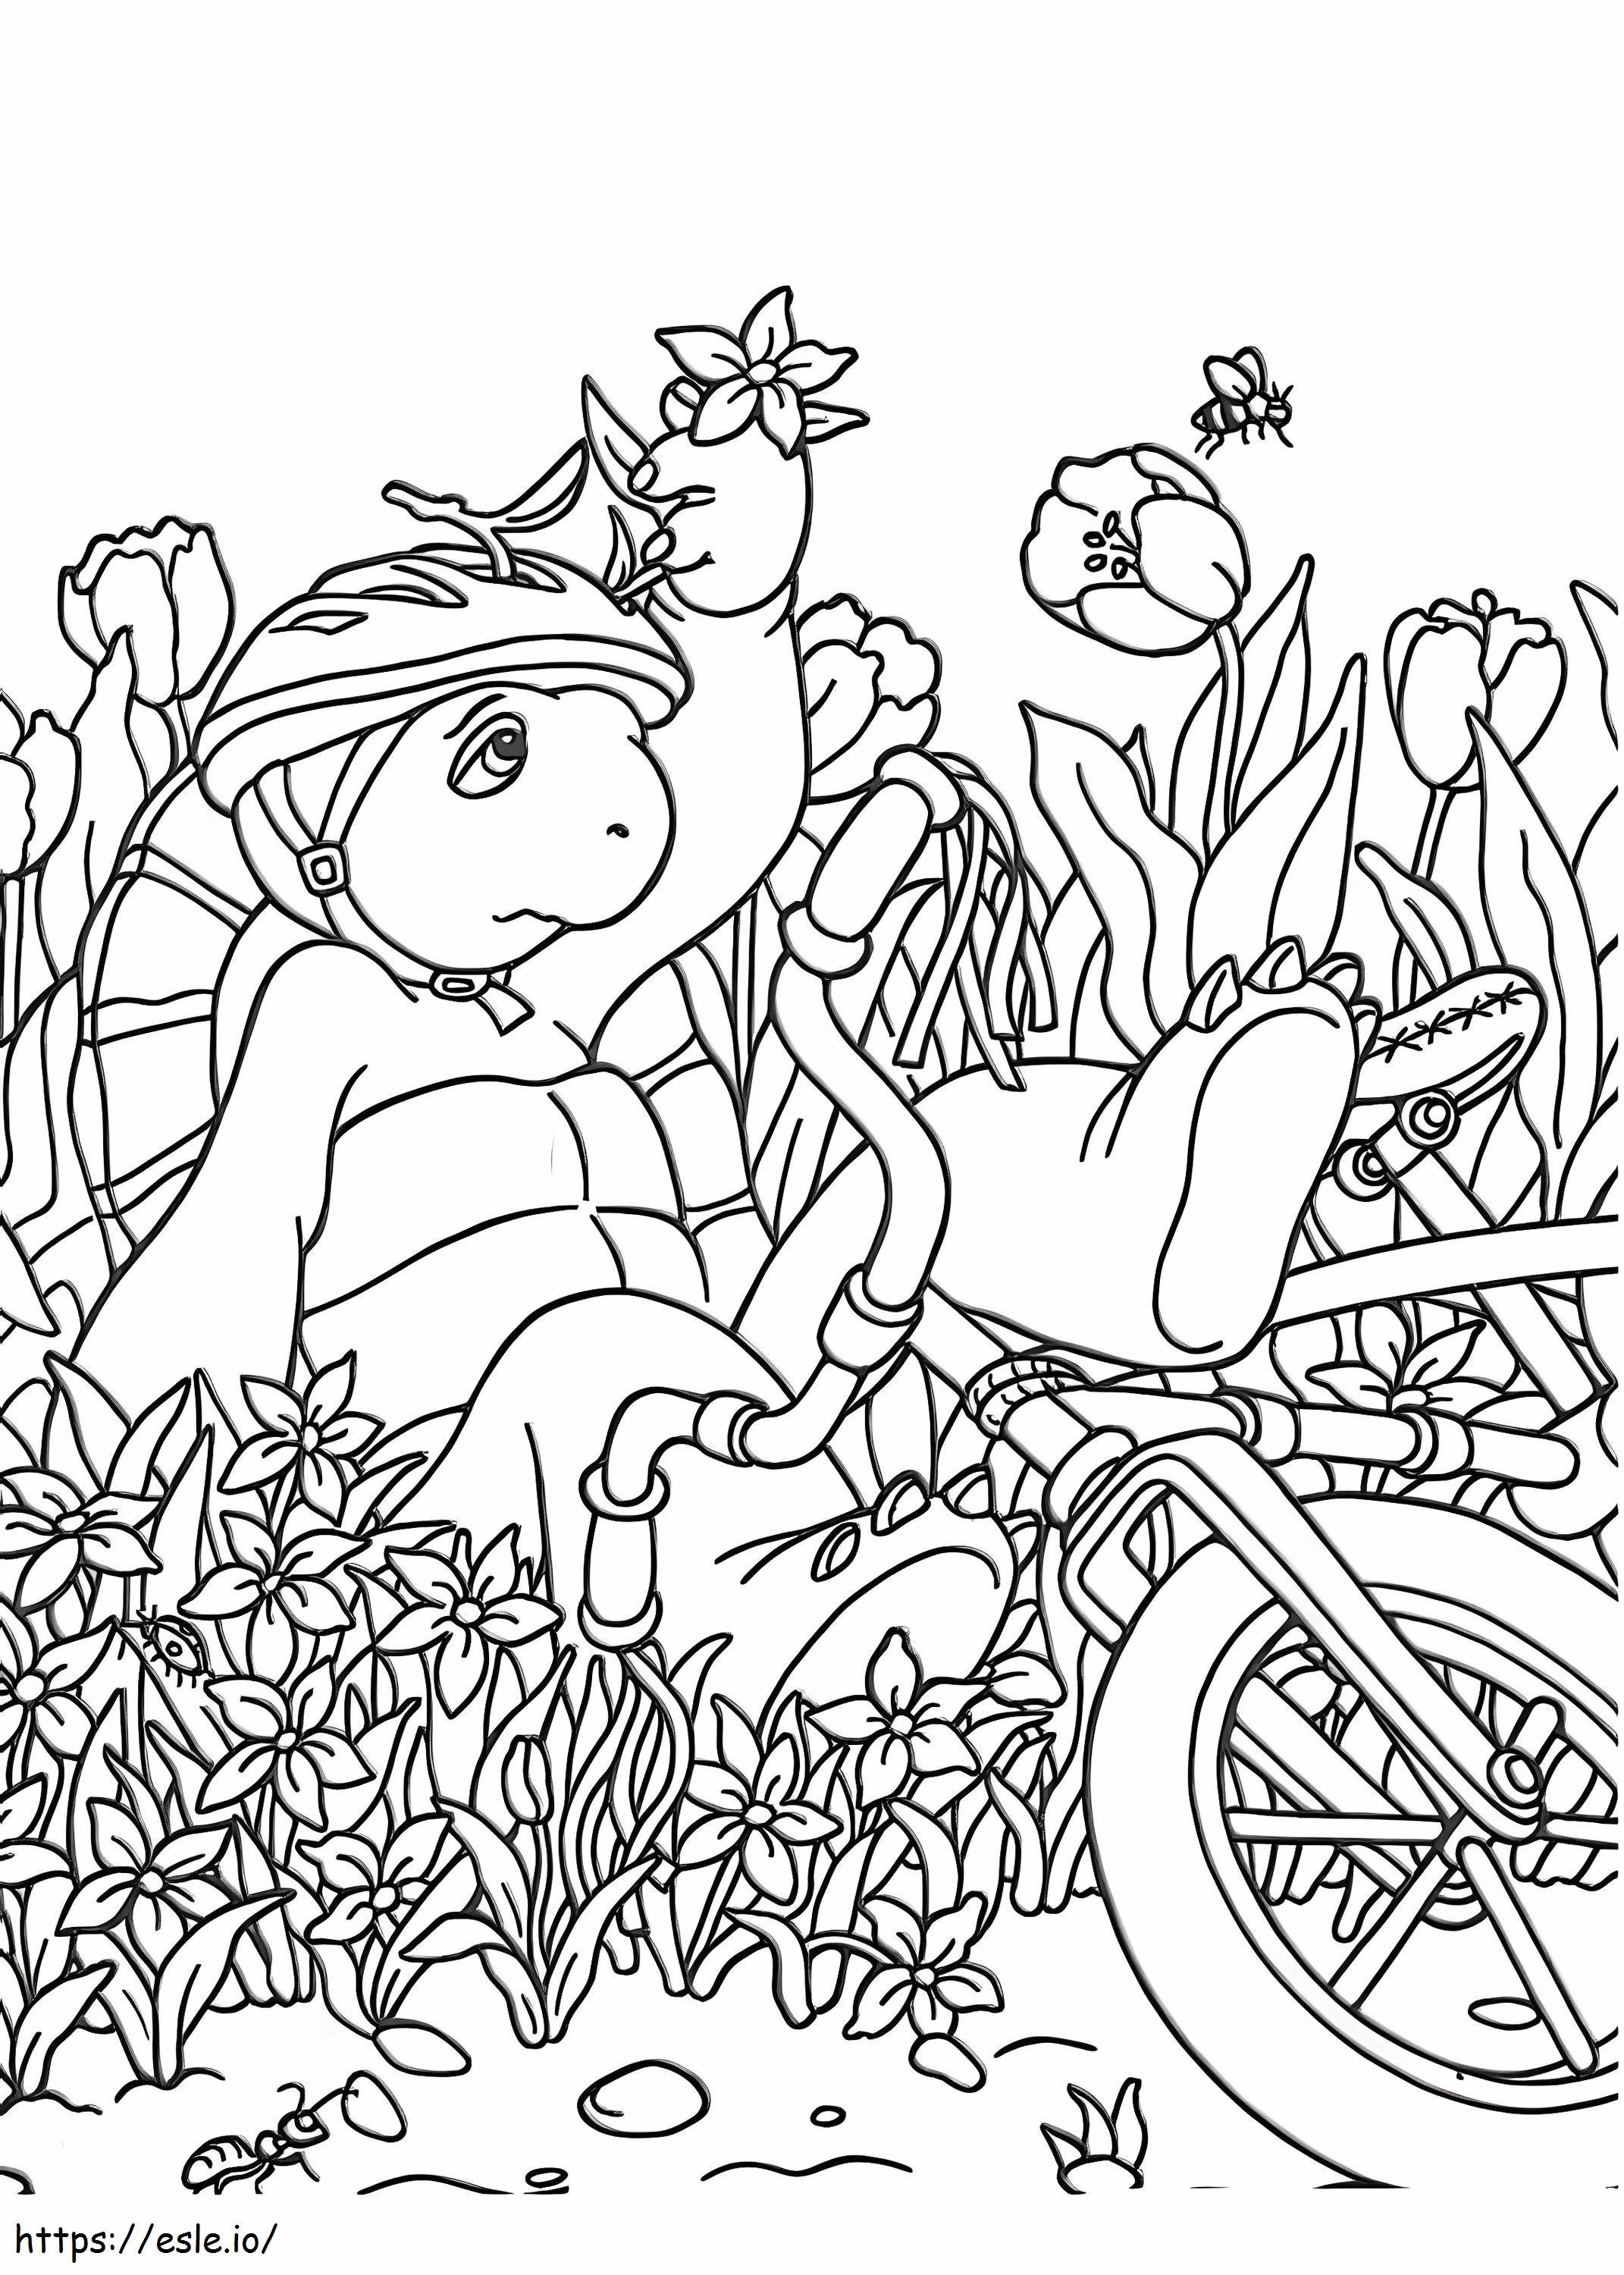 Sad Franklin With Flowers A4 coloring page